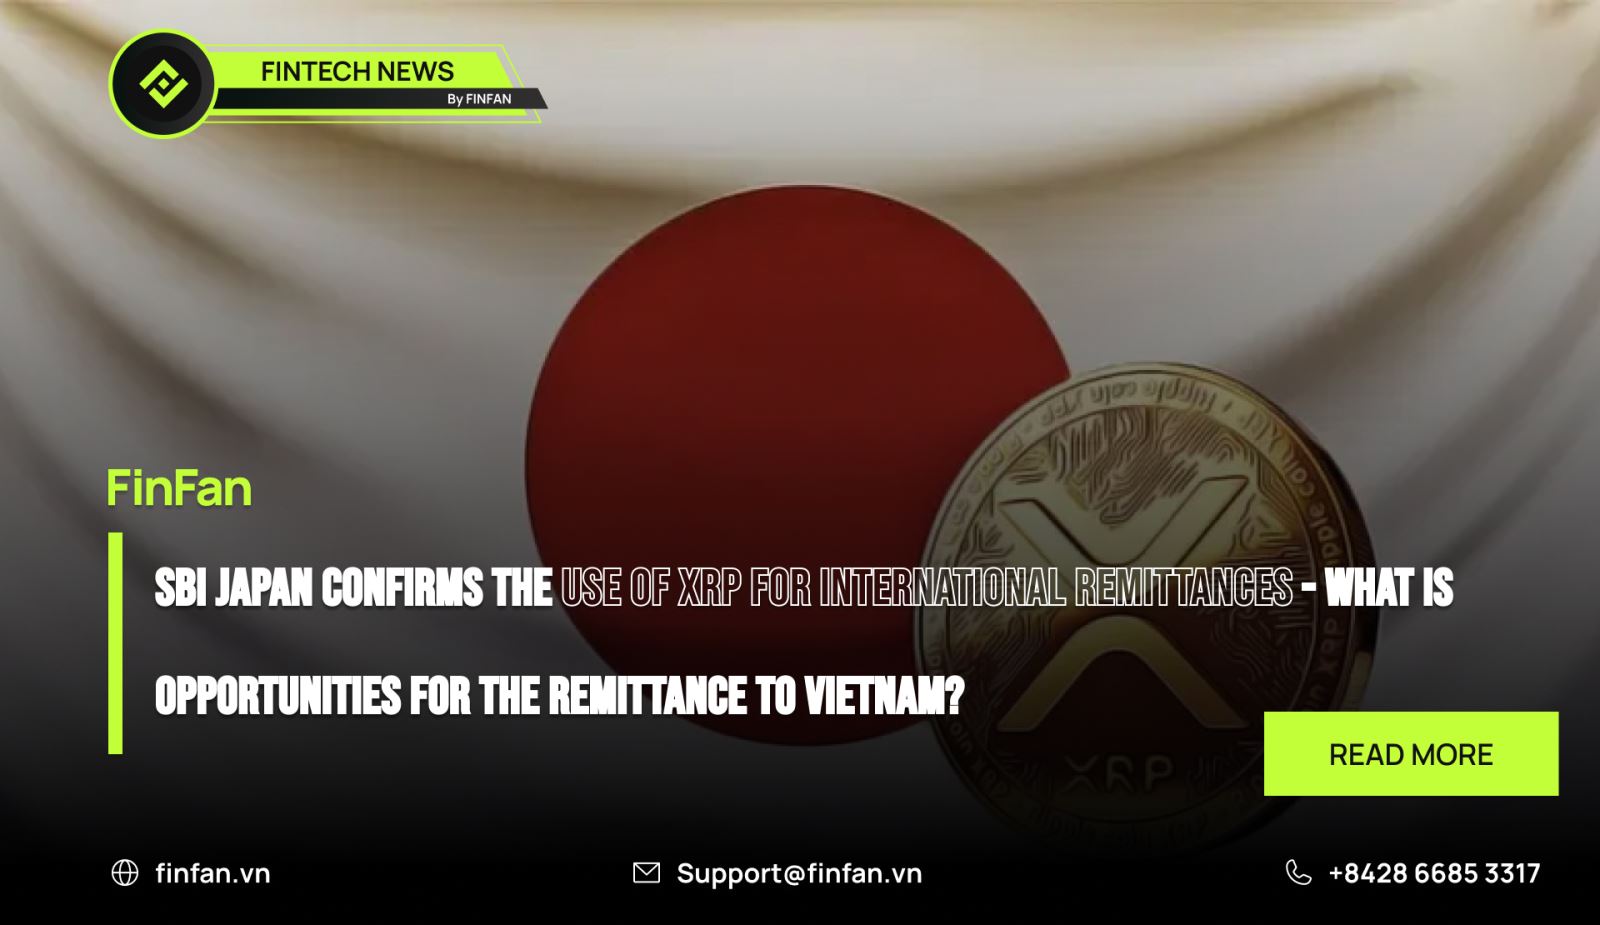 SBI Japan confirms the use of XRP for international remittances  - What is opportunities for the remittance to Vietnam?